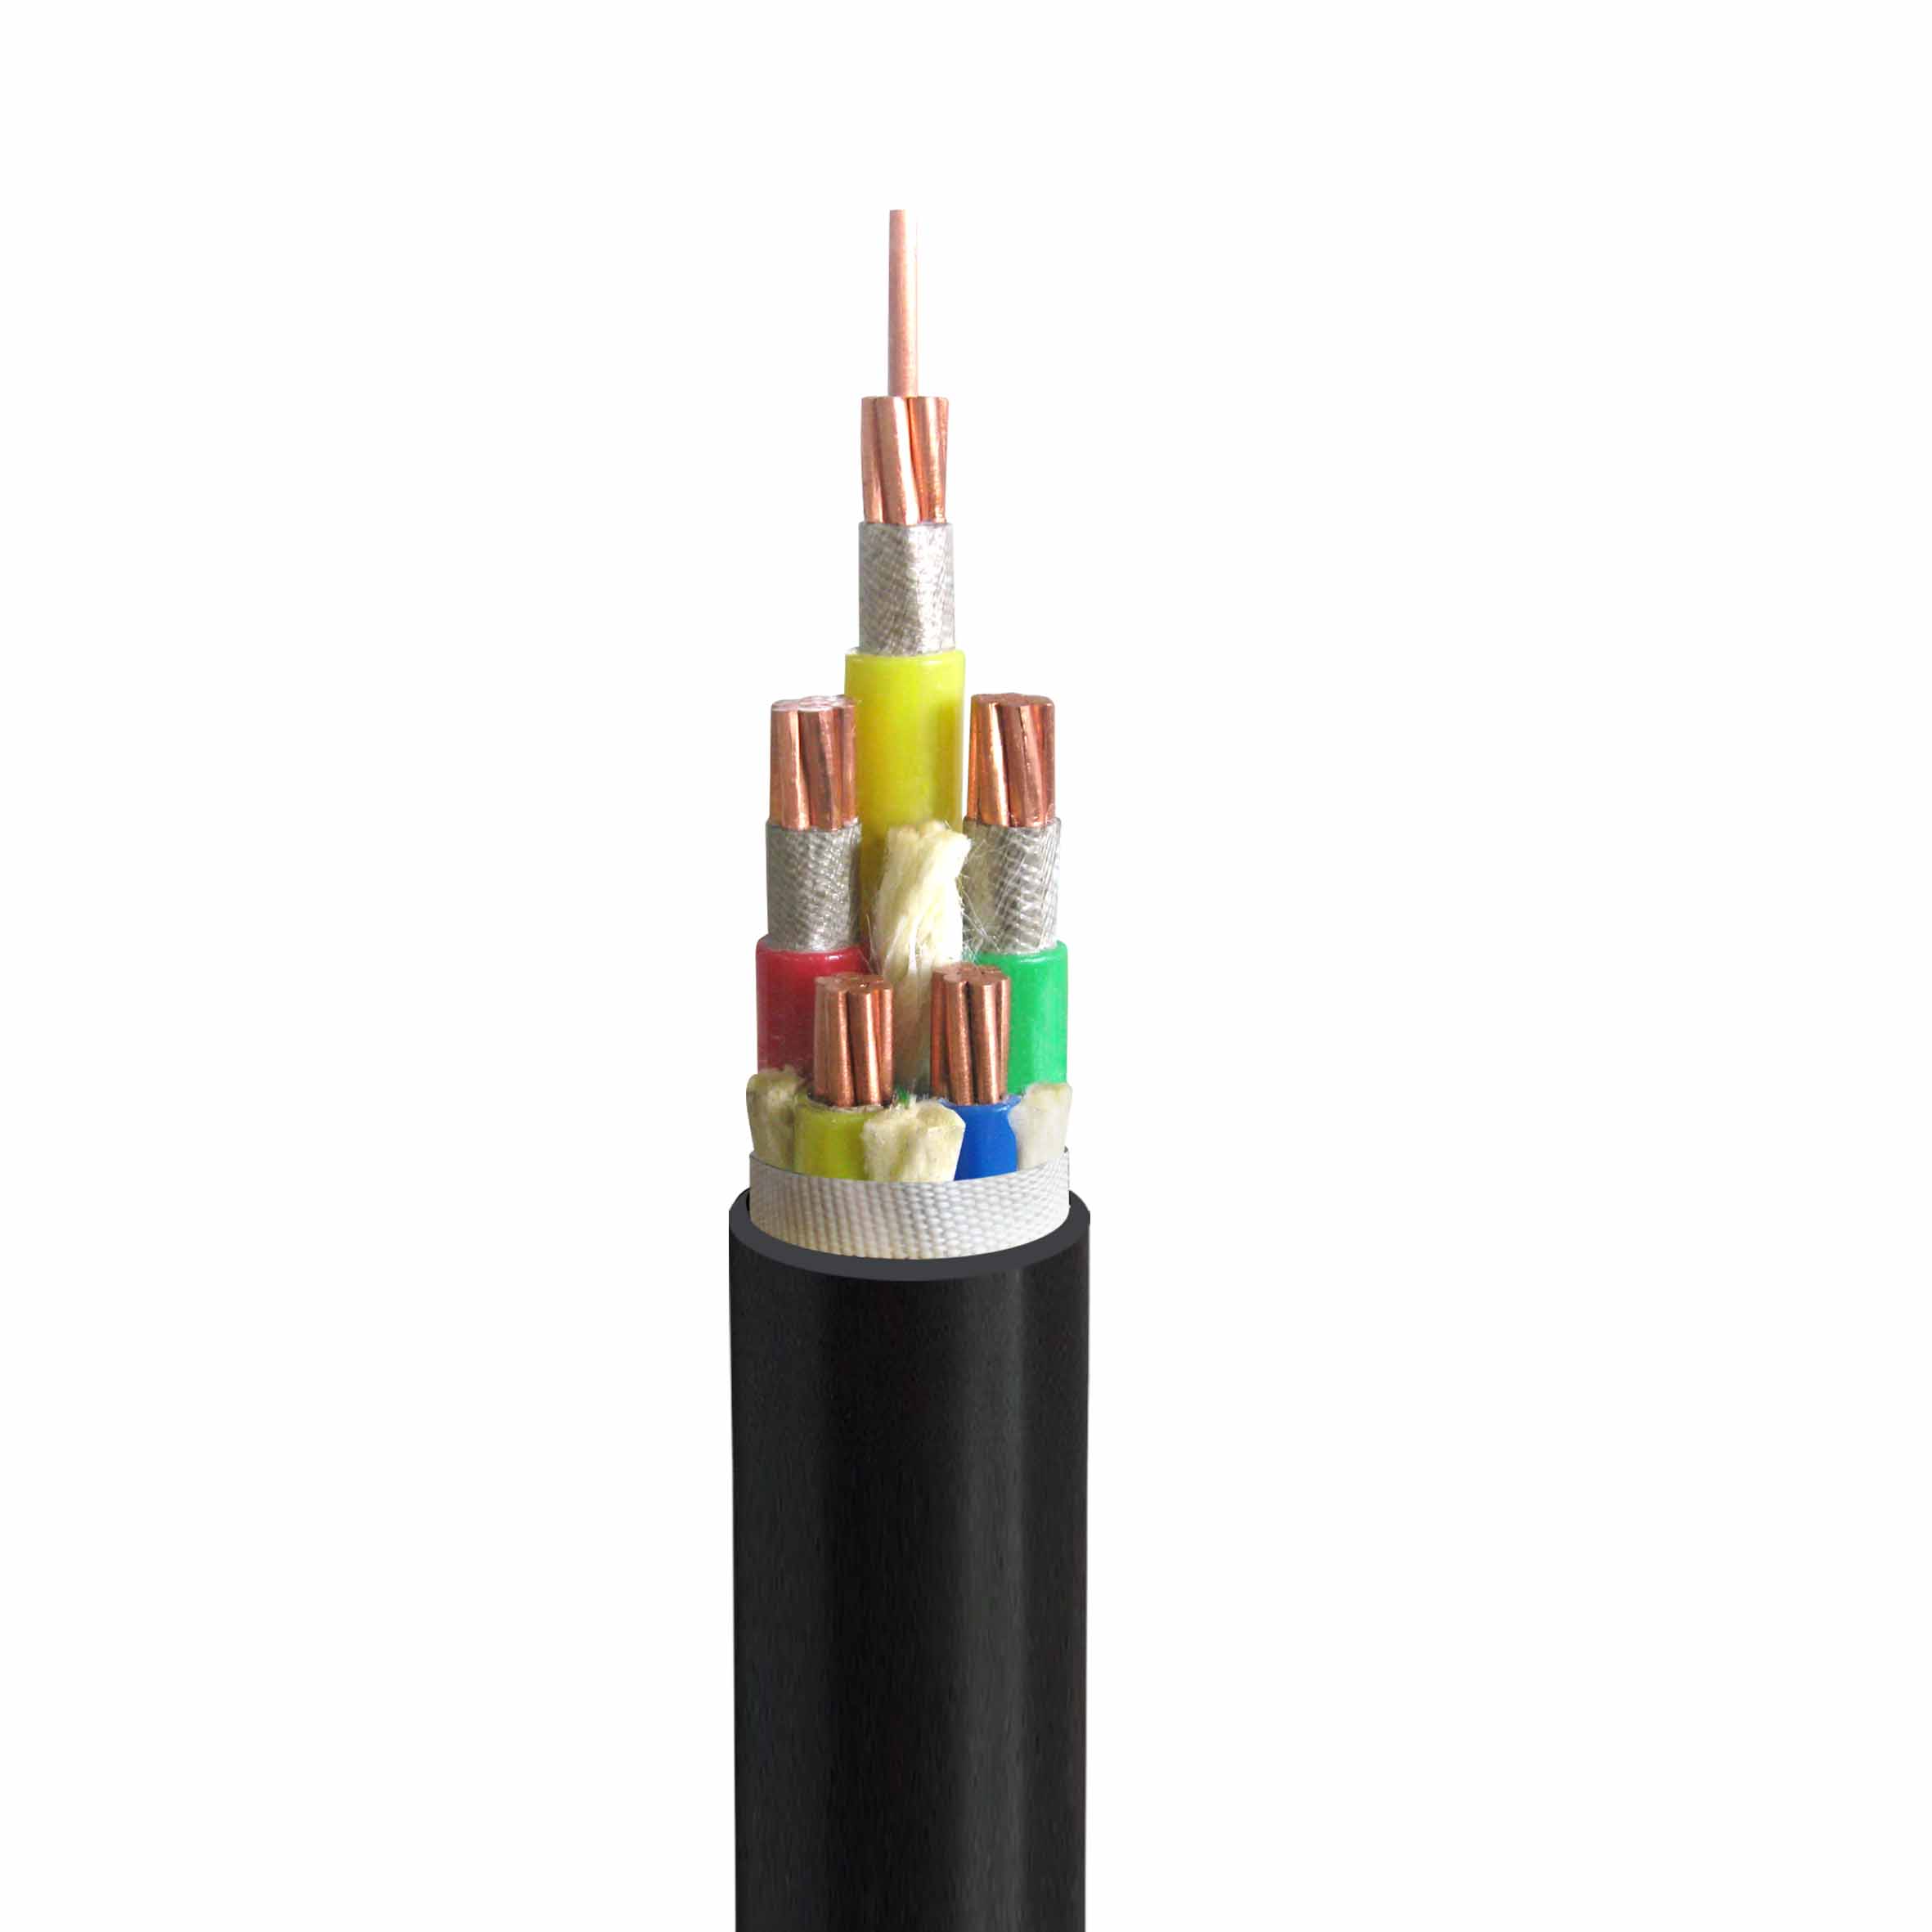 Frc-fire resistant cable